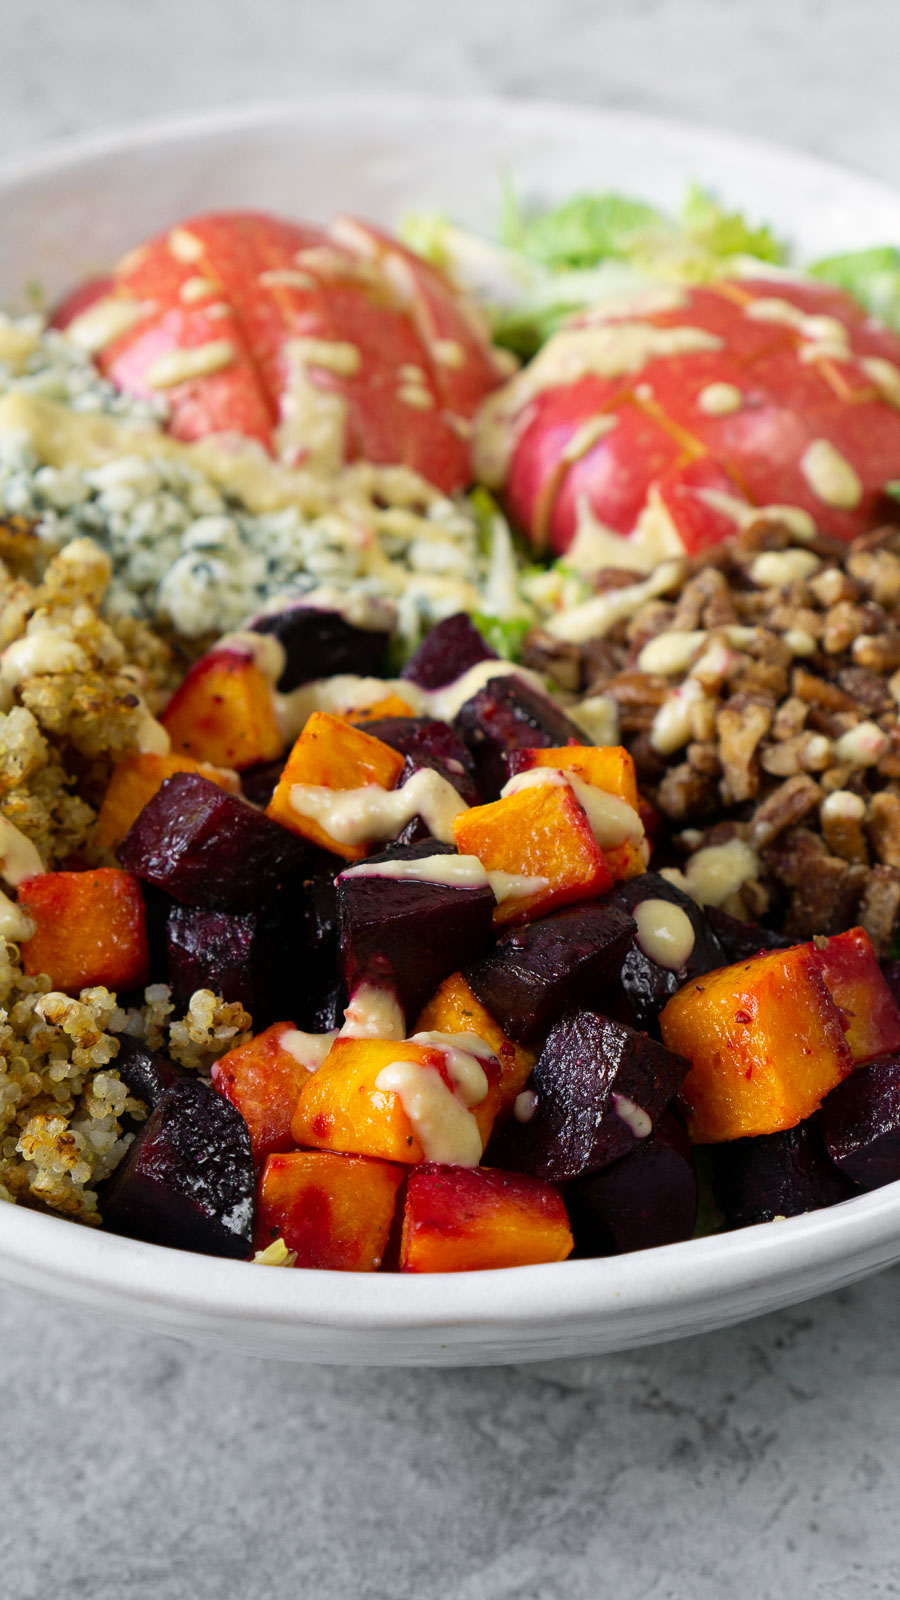 Autumn Harvest Salad with Kale, Sweet Potatoes, and Beets